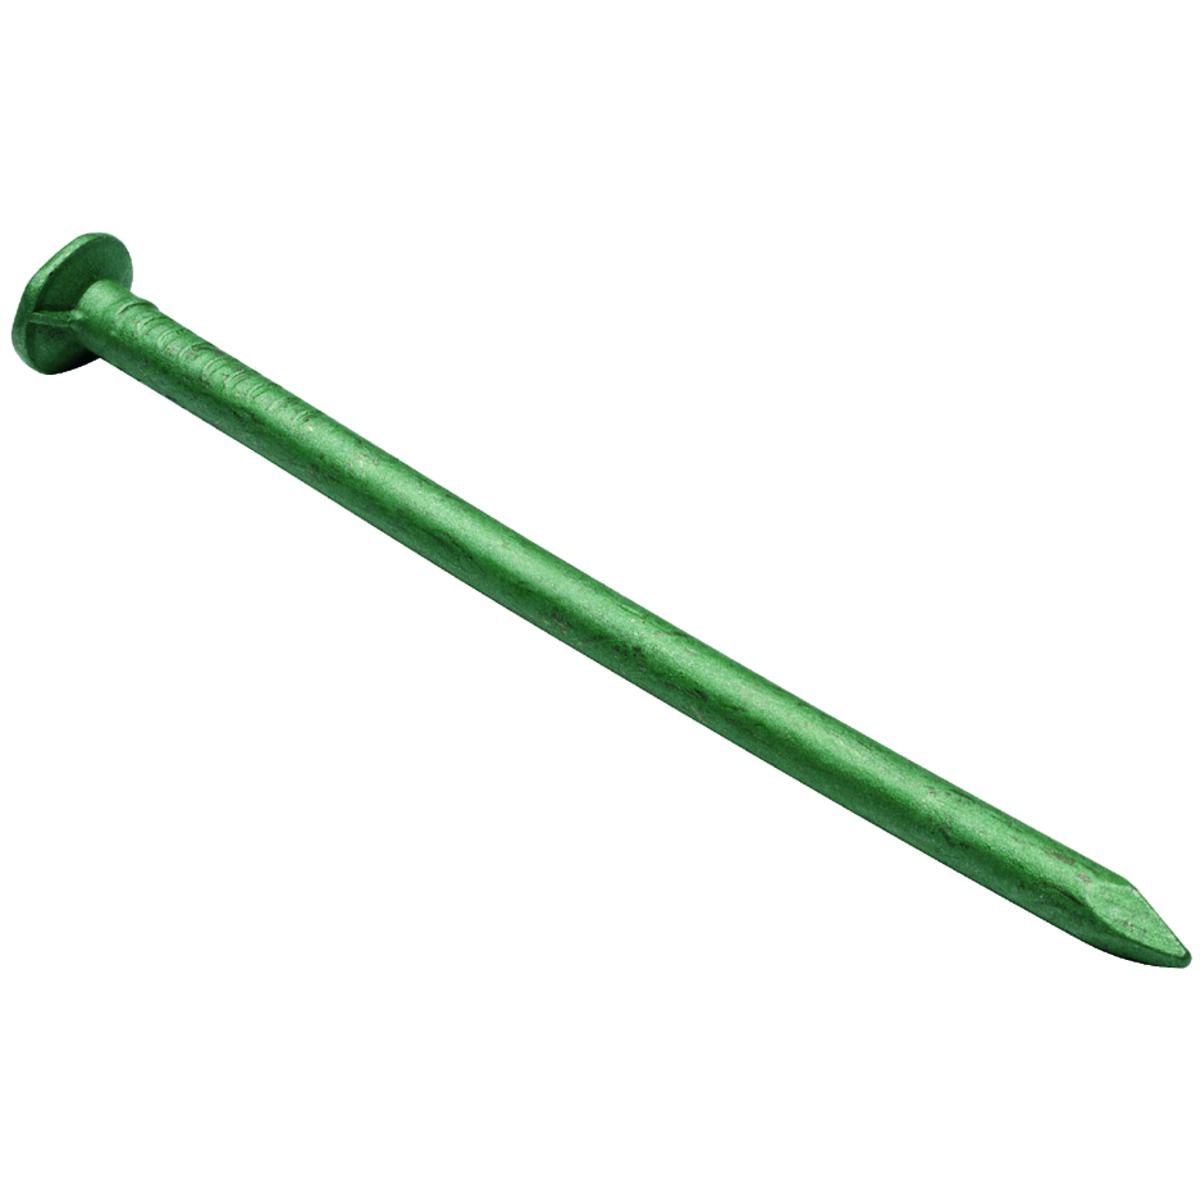 Image of Wickes 100mm Exterior Nails - 250g